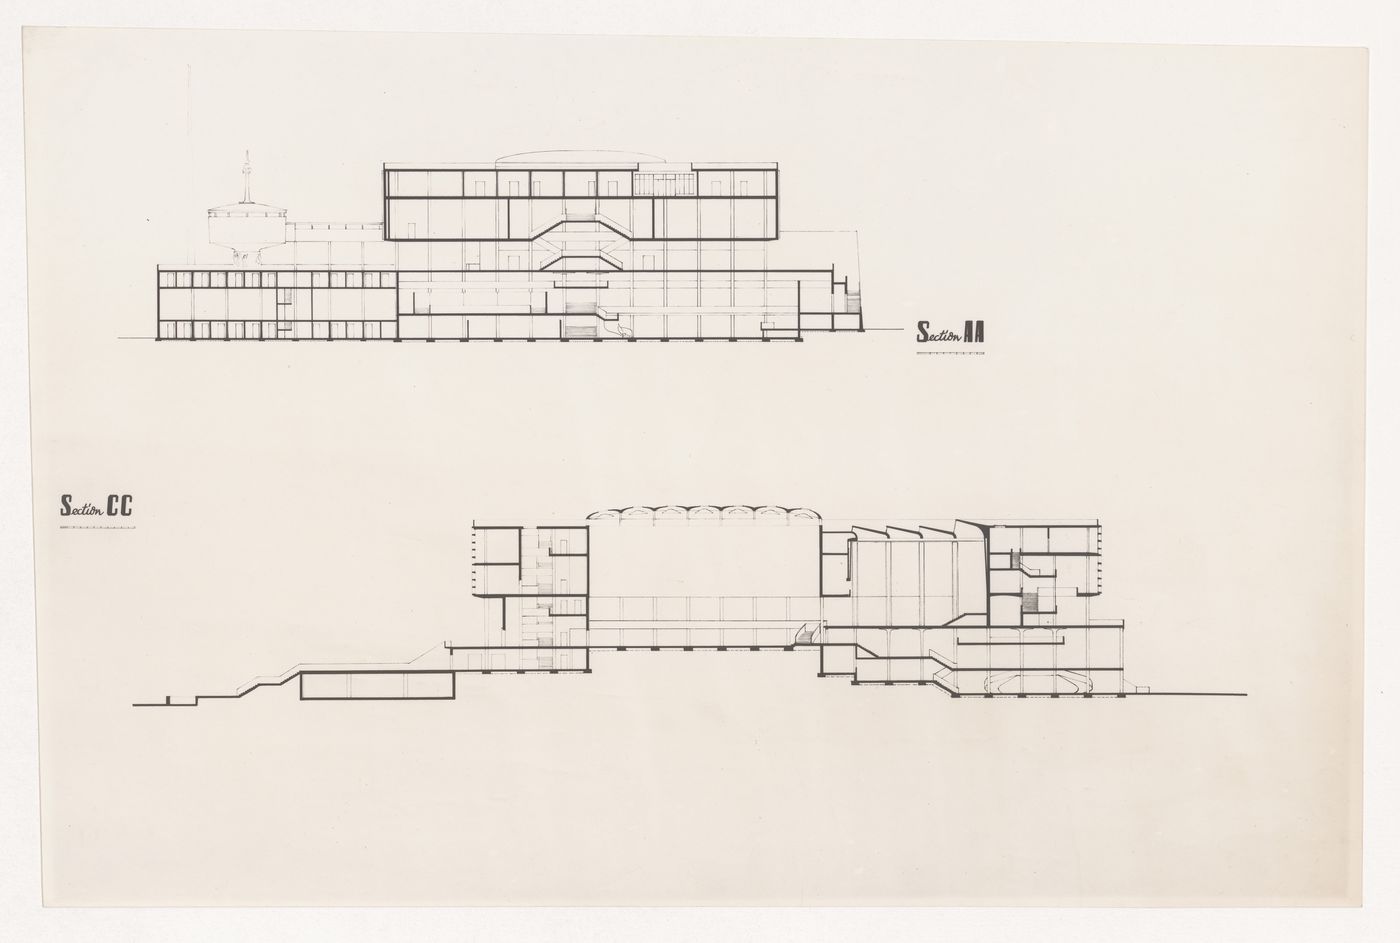 Sections for Government House, Addis Ababa, Ethiopia